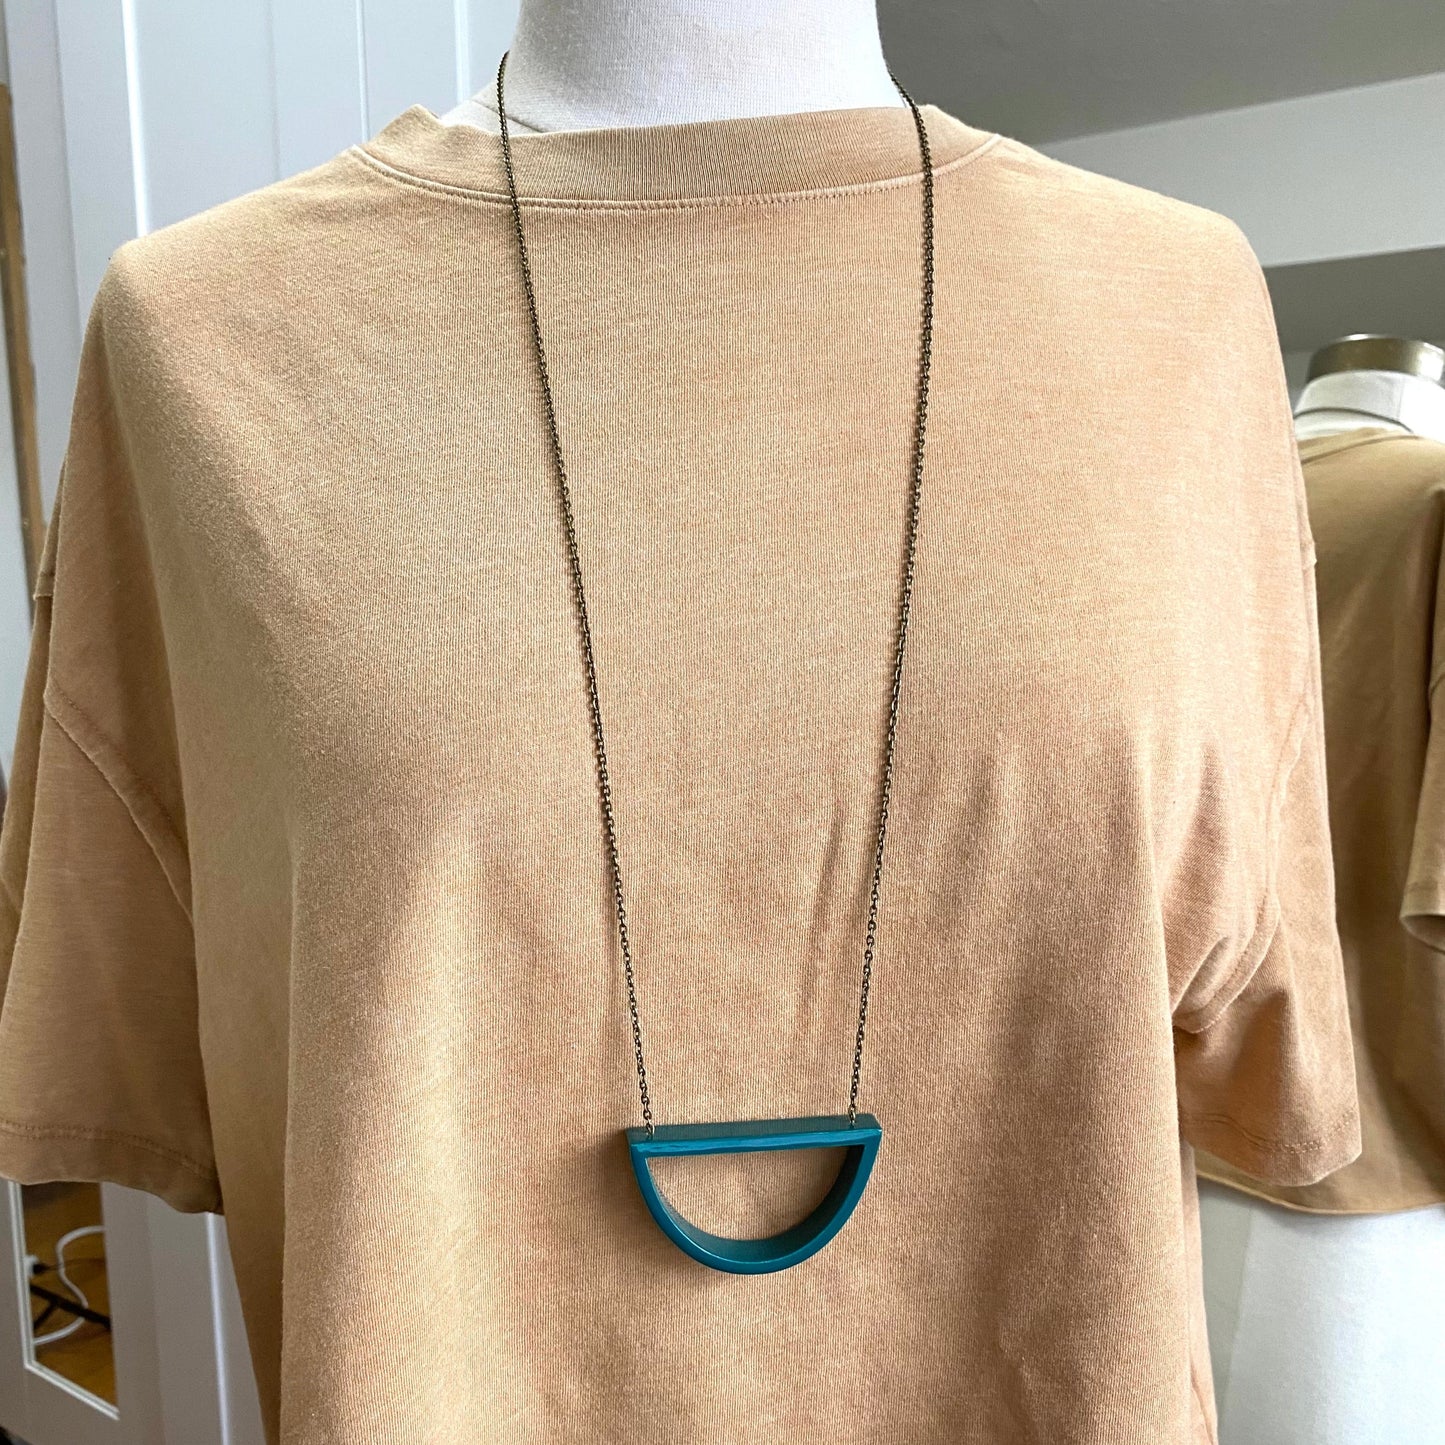 Capped Curve Necklace - Terra Cotta & Lagoon